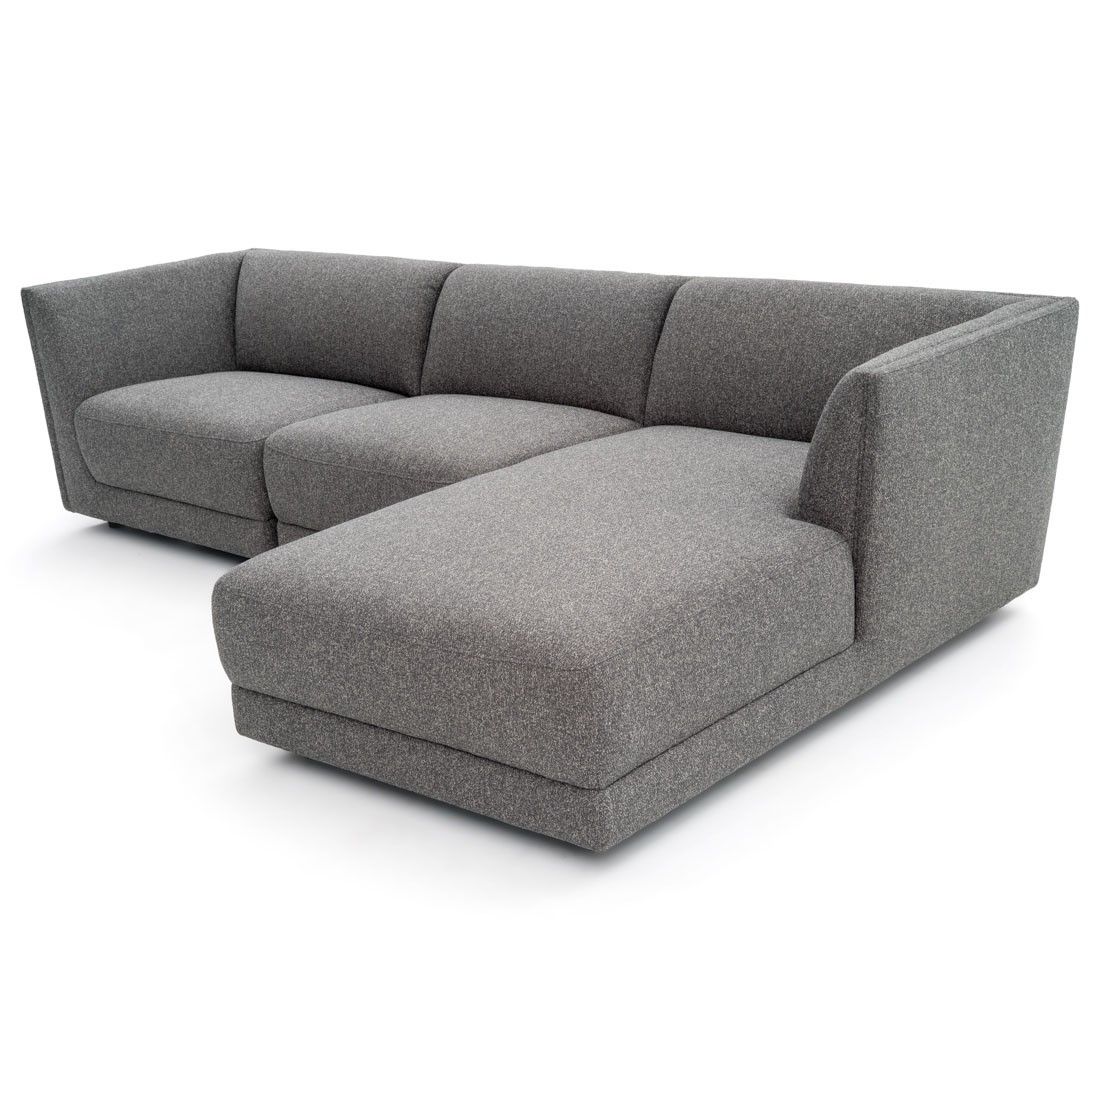 Sectionals – Nathan | Mobilia | Sofa | Pinterest | Living Room Sofa With Regard To Mobilia Sectional Sofas (View 5 of 10)